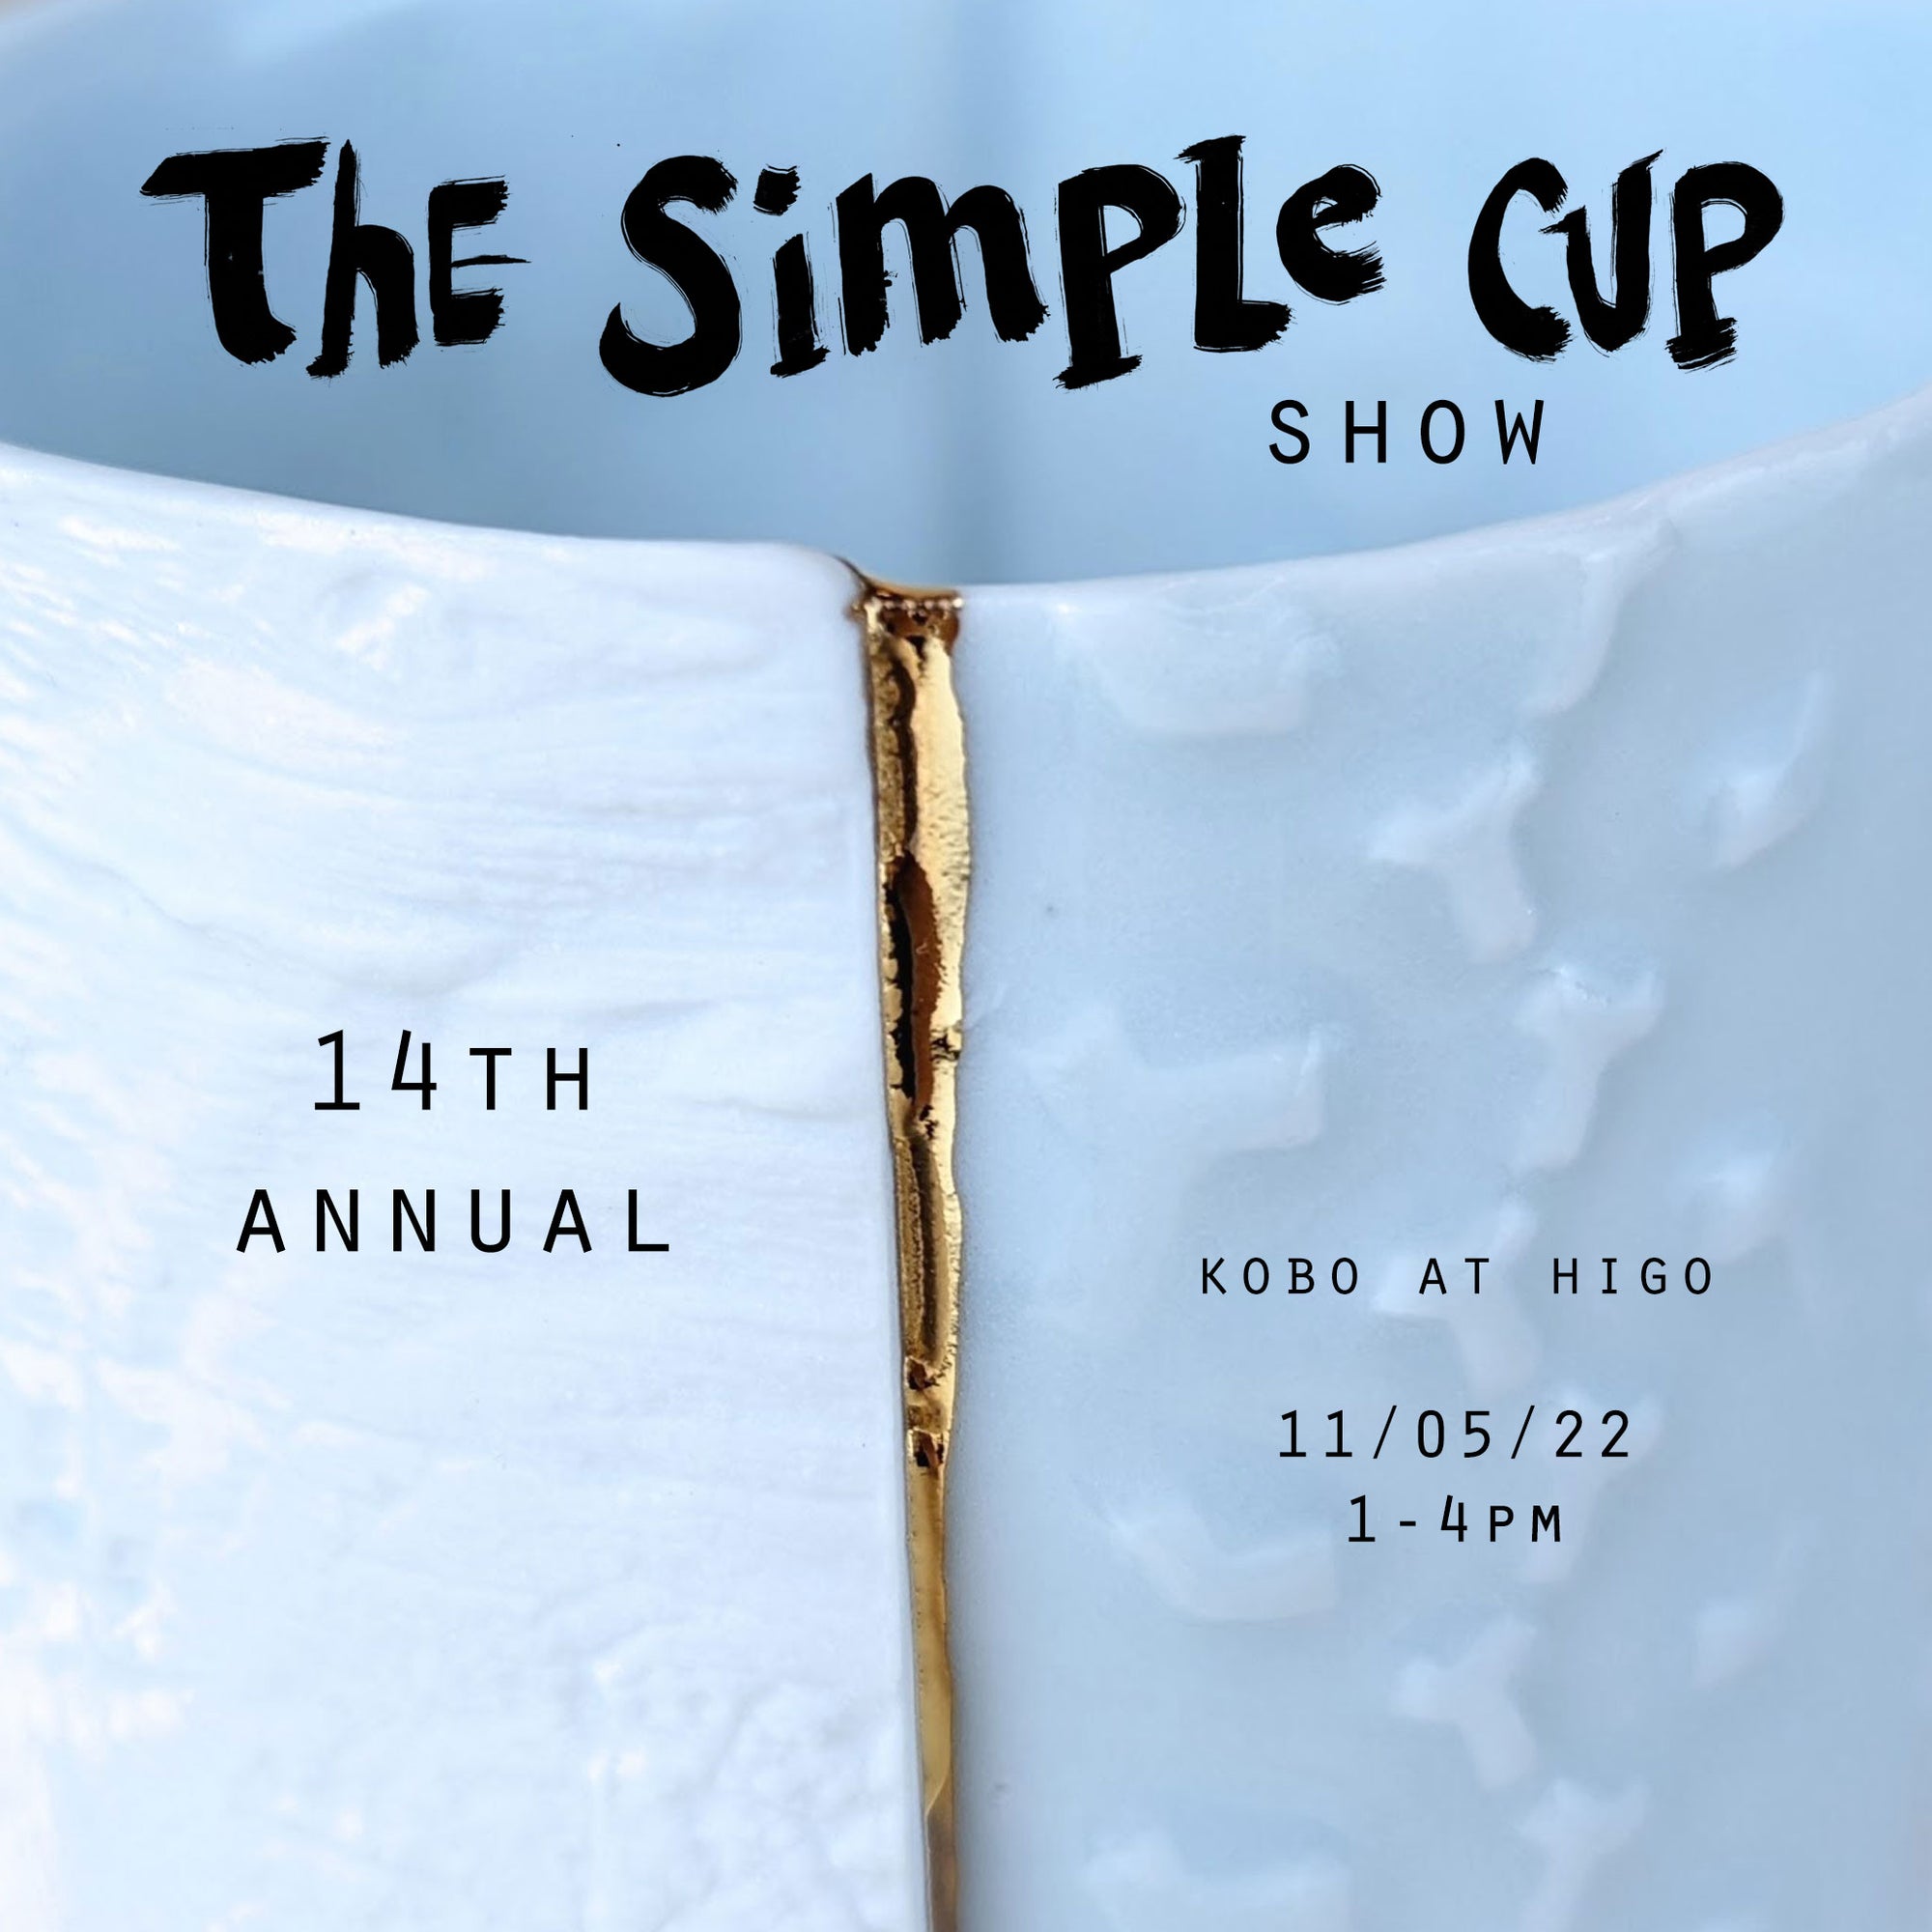 14th Annual The Simple Cup Show - November 5, 2022